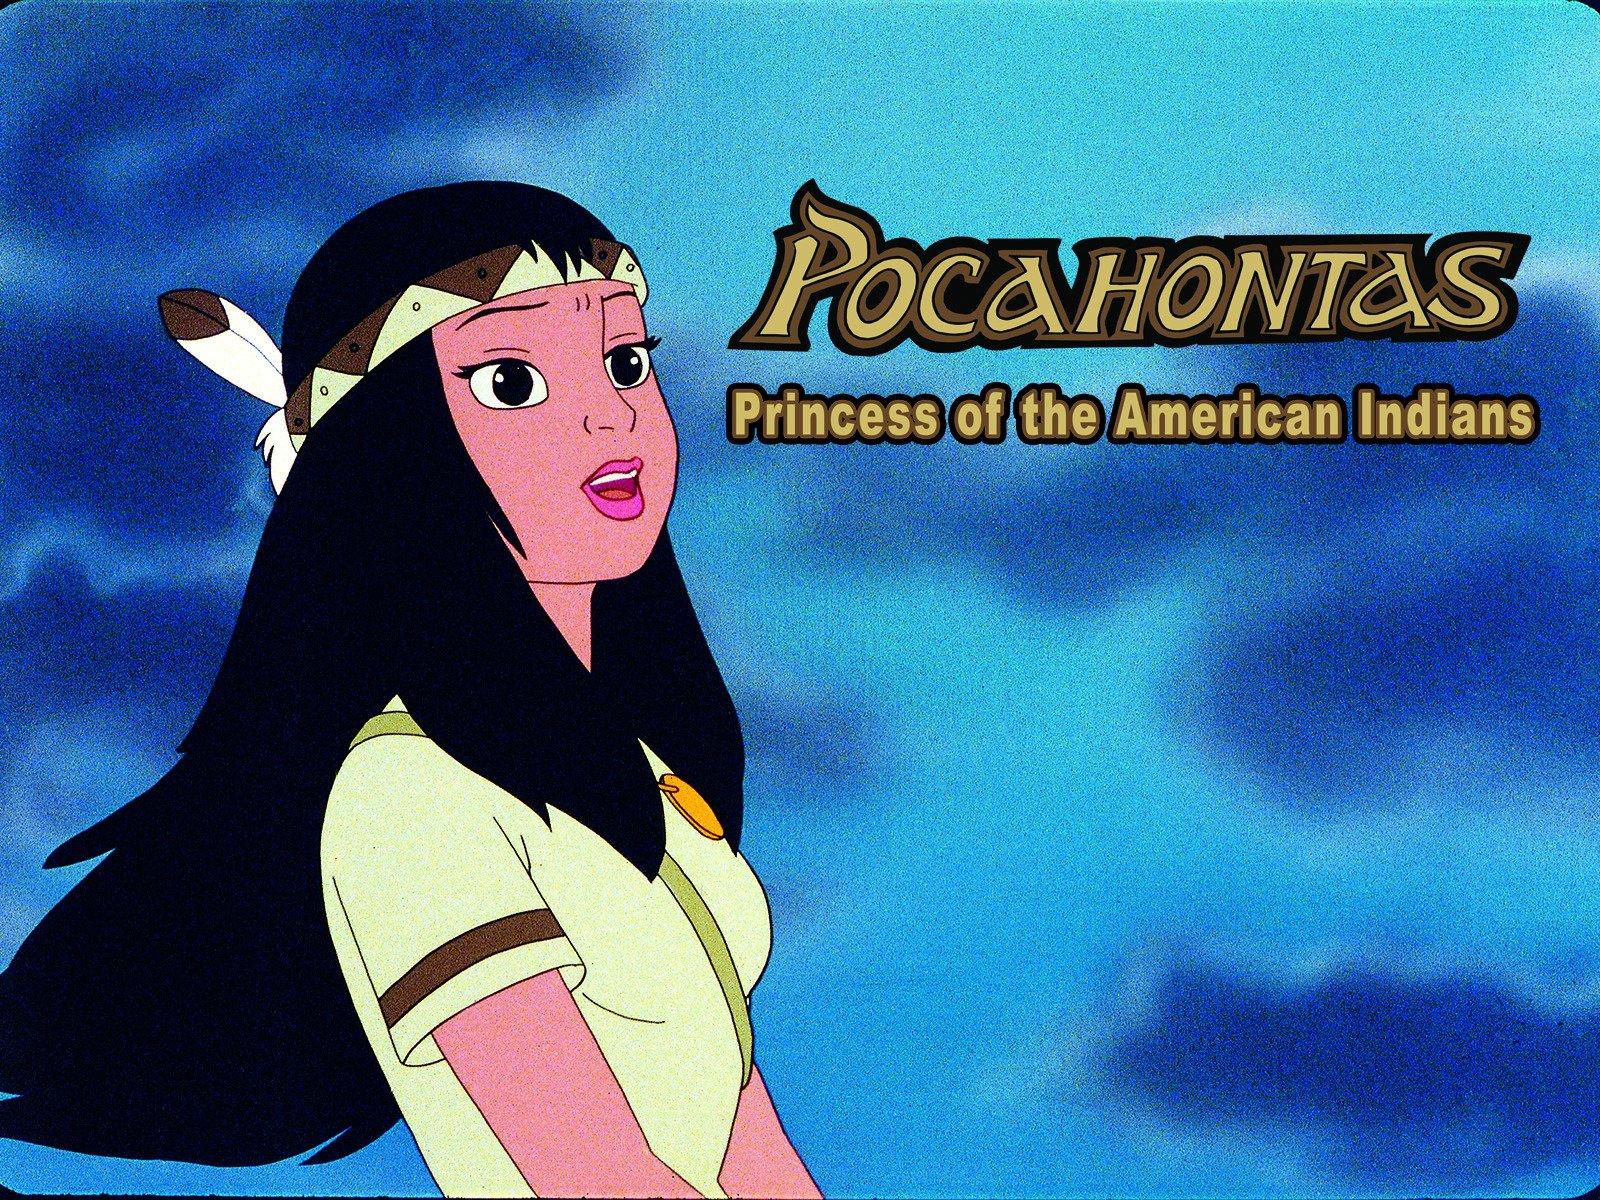 Amazon.co.uk: Watch Pocahontas: Princess of the American Indians